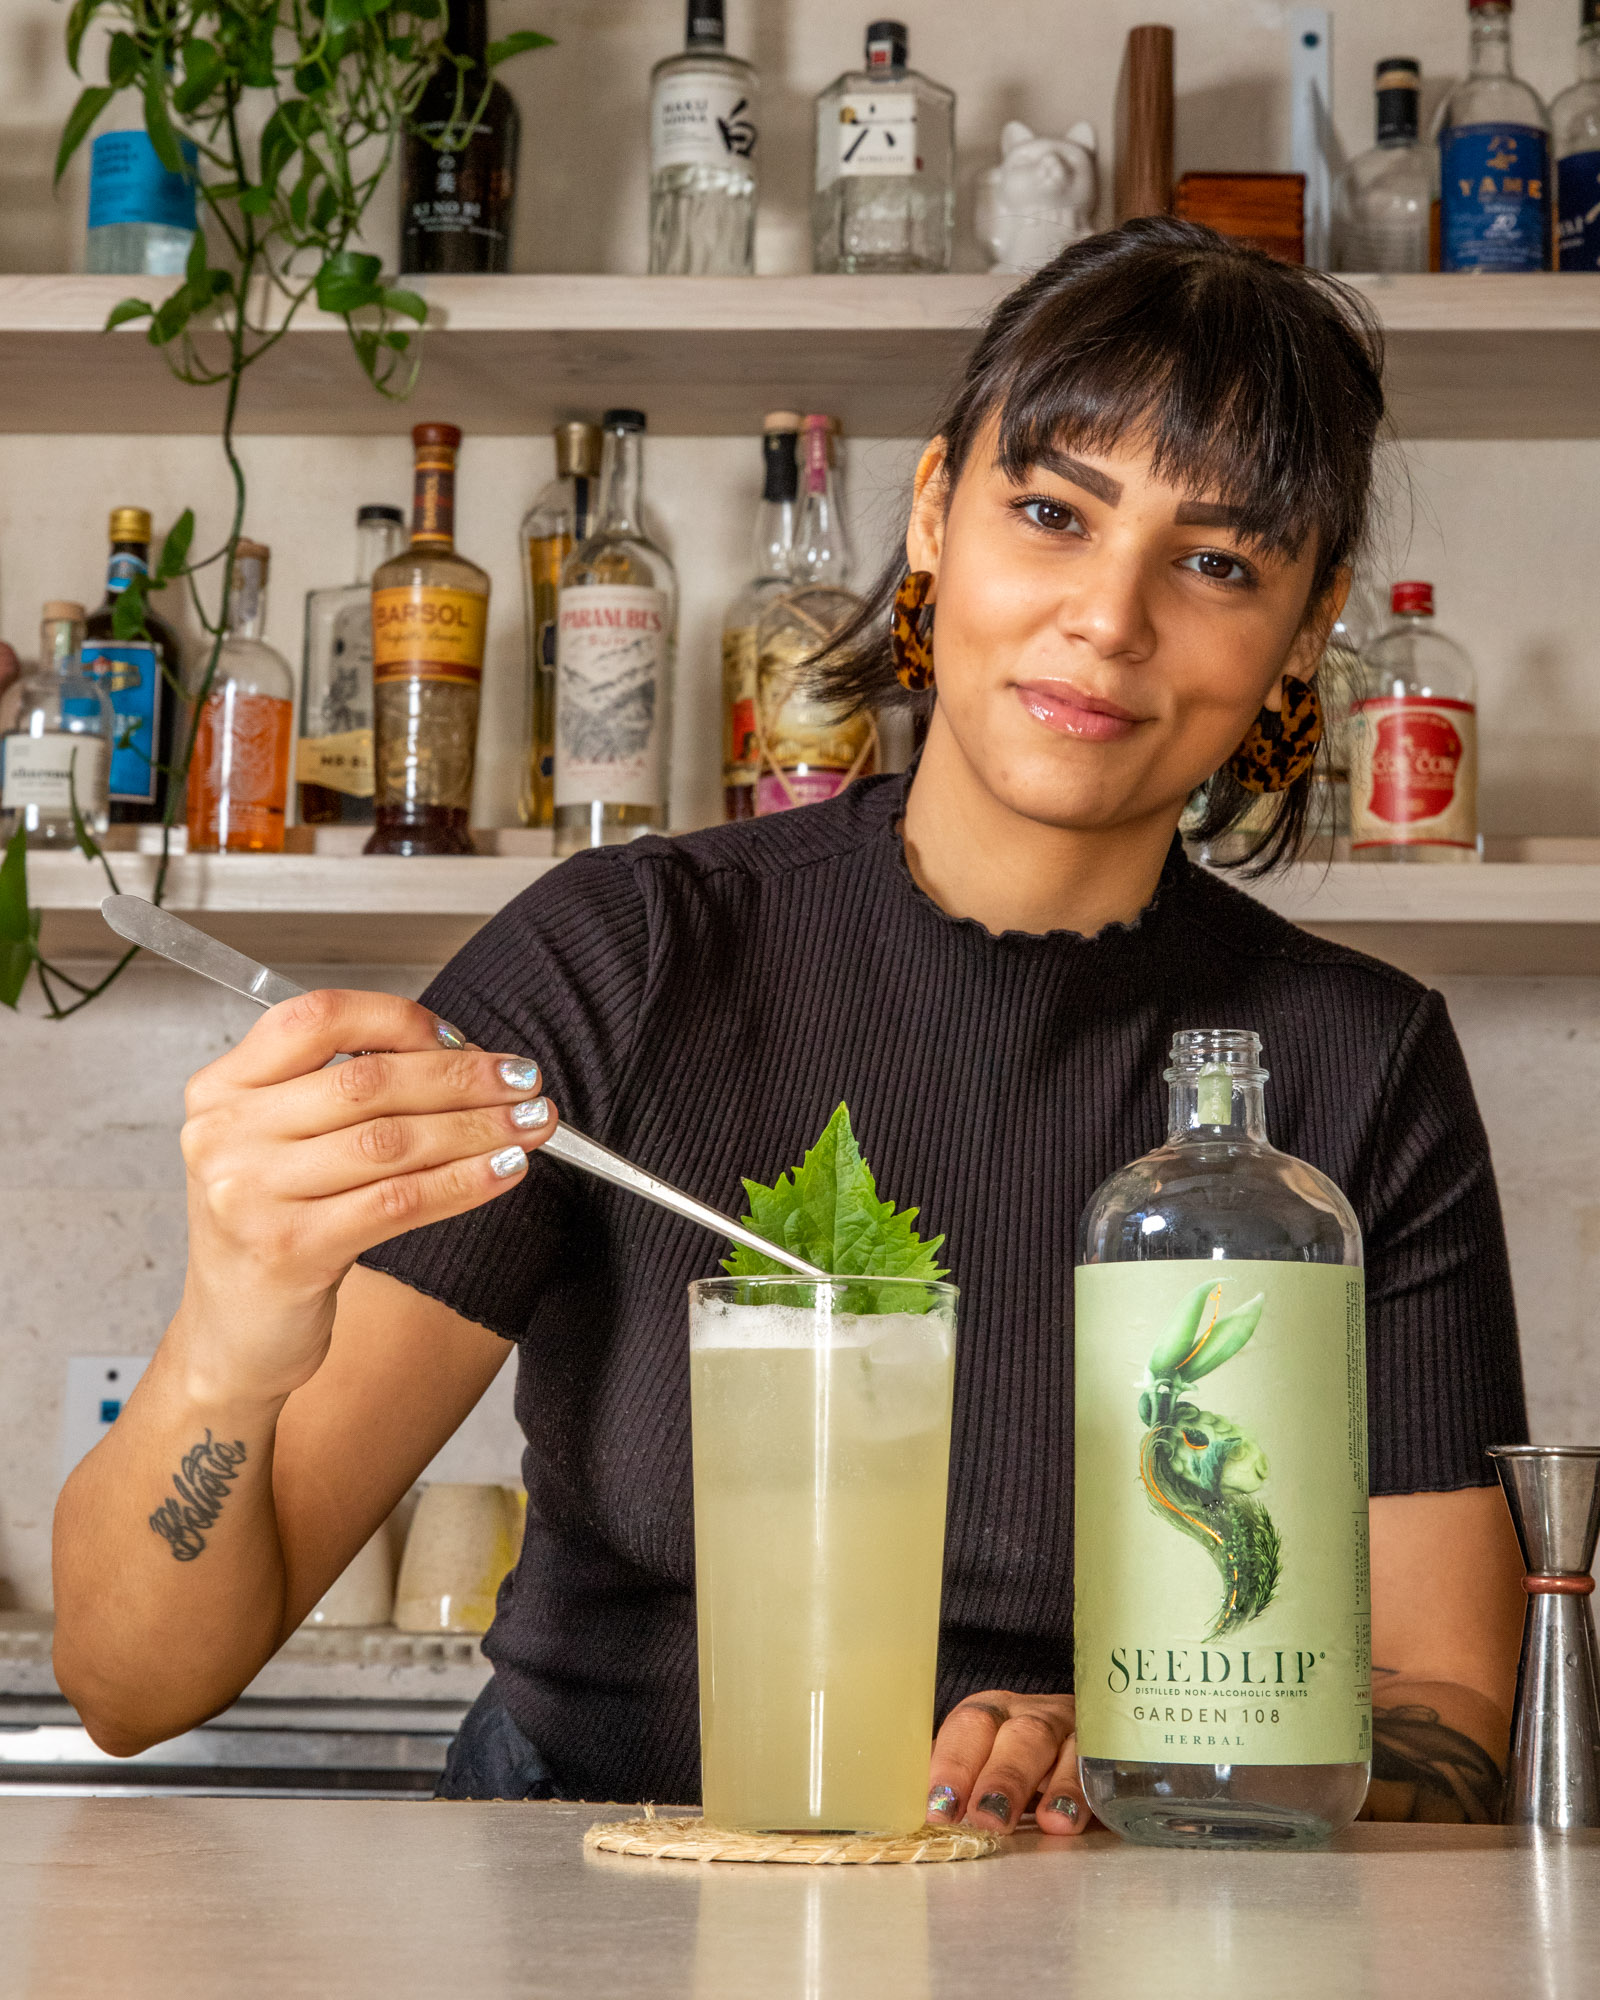 Bartender looking into the camera while she puts a garnish on a drink